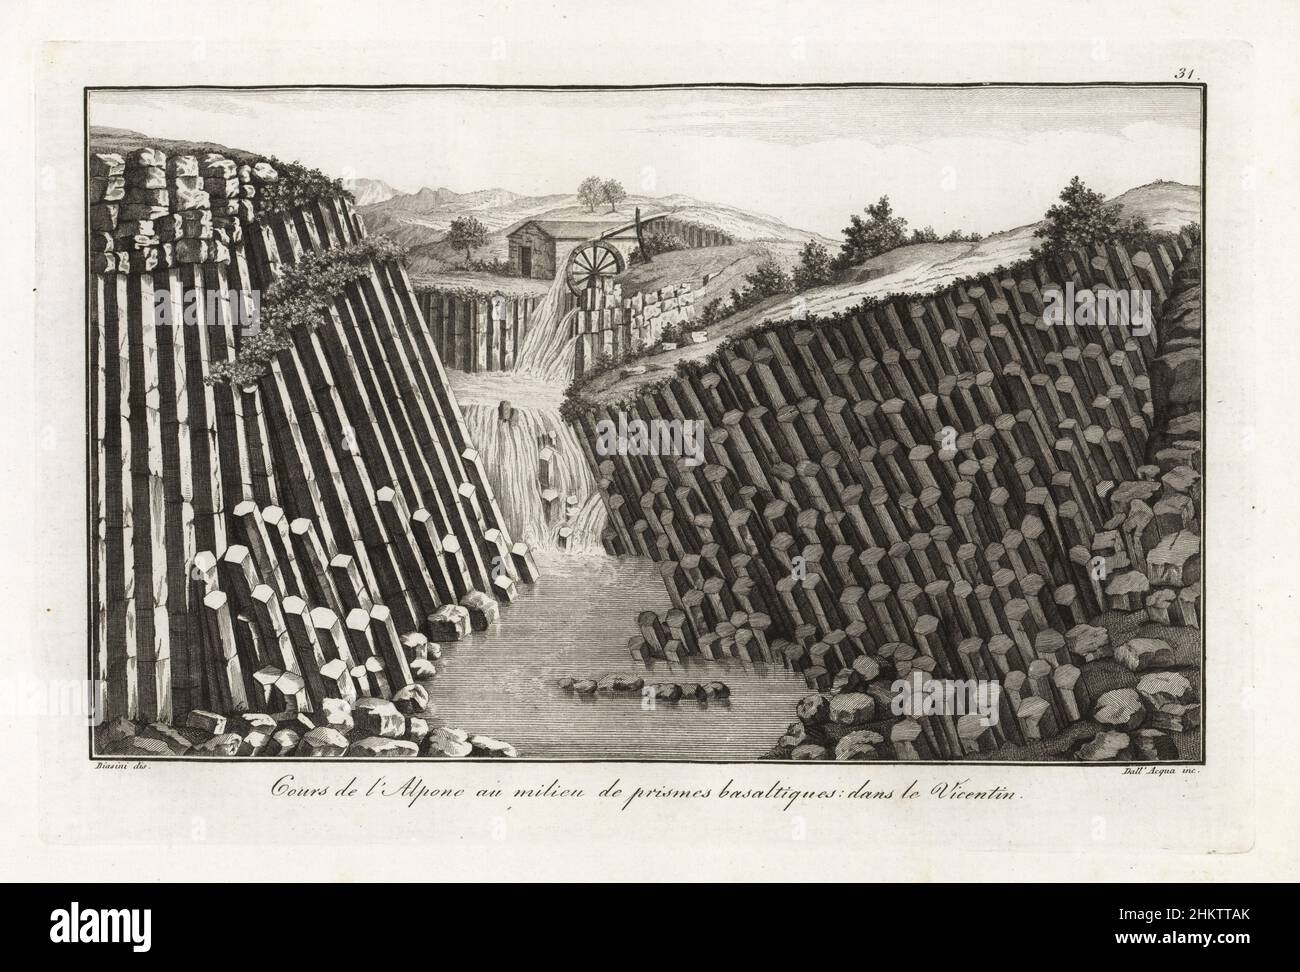 The course of the river Alpone through basalt prisms in the Vicentin, Italy, 18th century. Cours de l'Alpone au milieu de prismes basaltiques dans le Vicentin. Copperplate engraving by  from Scipion Breislak’s Traite sur la Structure Exterieure du Globe, Treatise on the Exterior Structure of the Globe, Jean-Pierre Giegler, Milan, 1822. Stock Photo